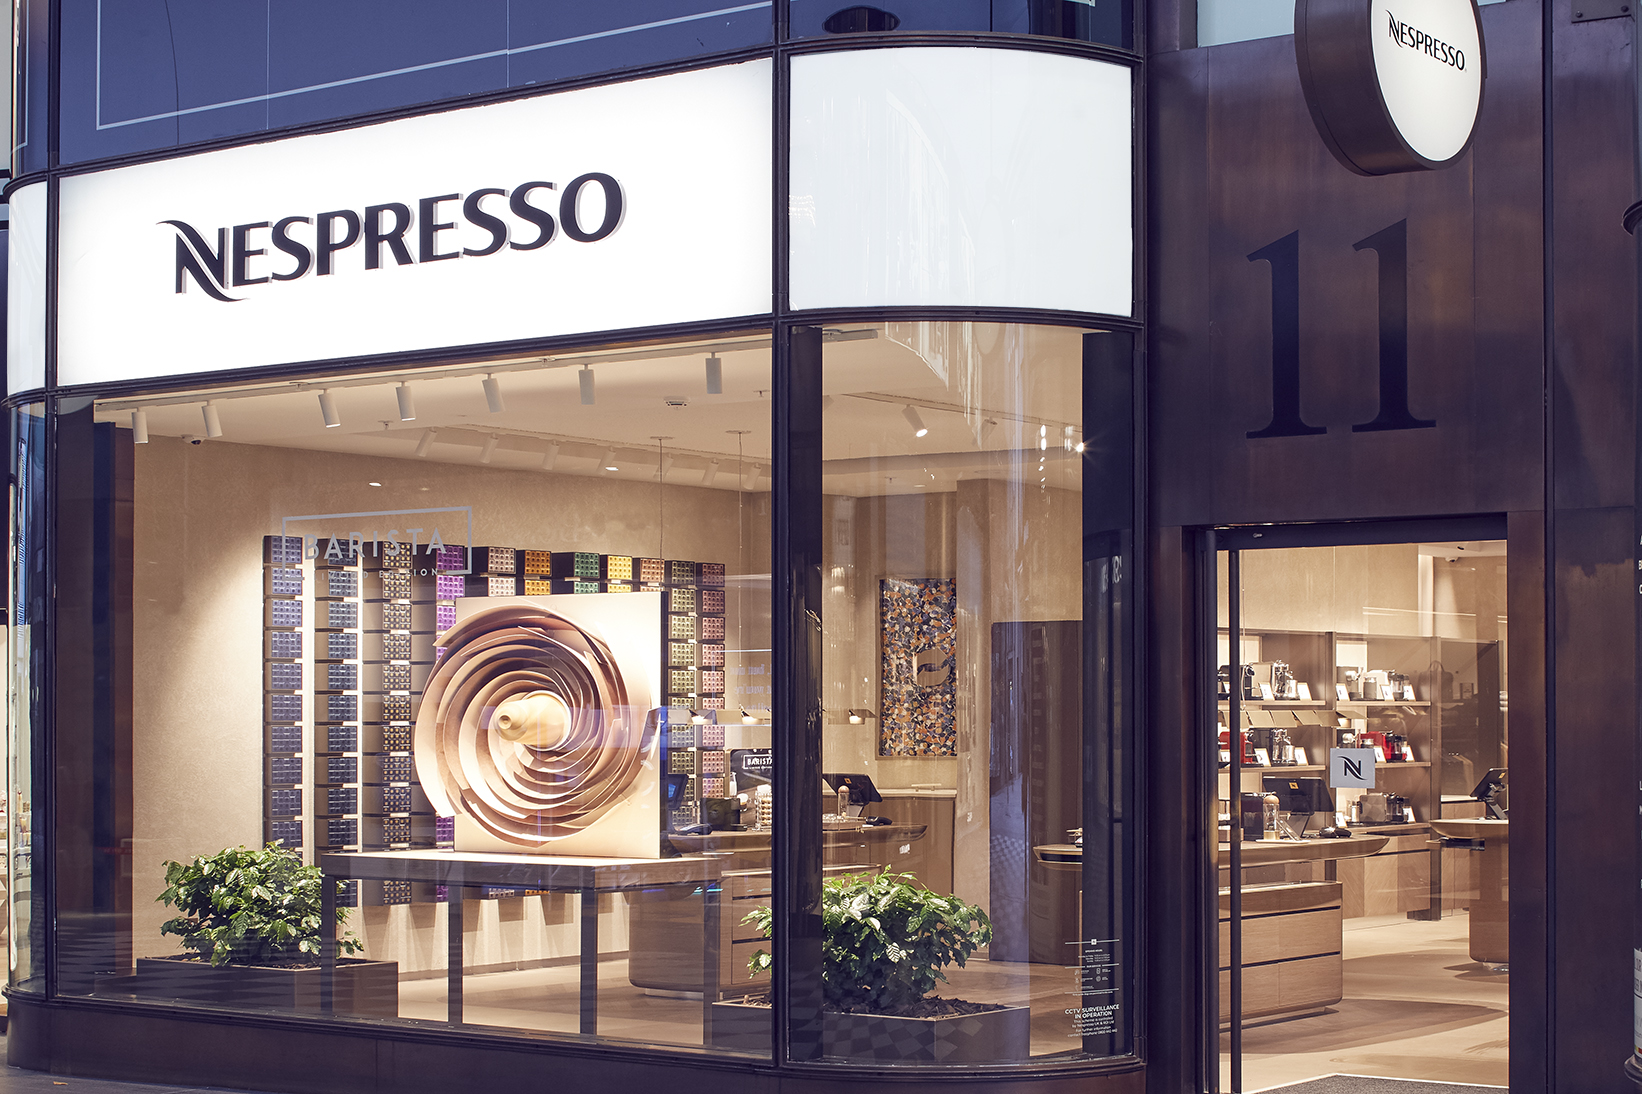 INSIDE LOOK: Nespresso premieres new boutique concept in the UK